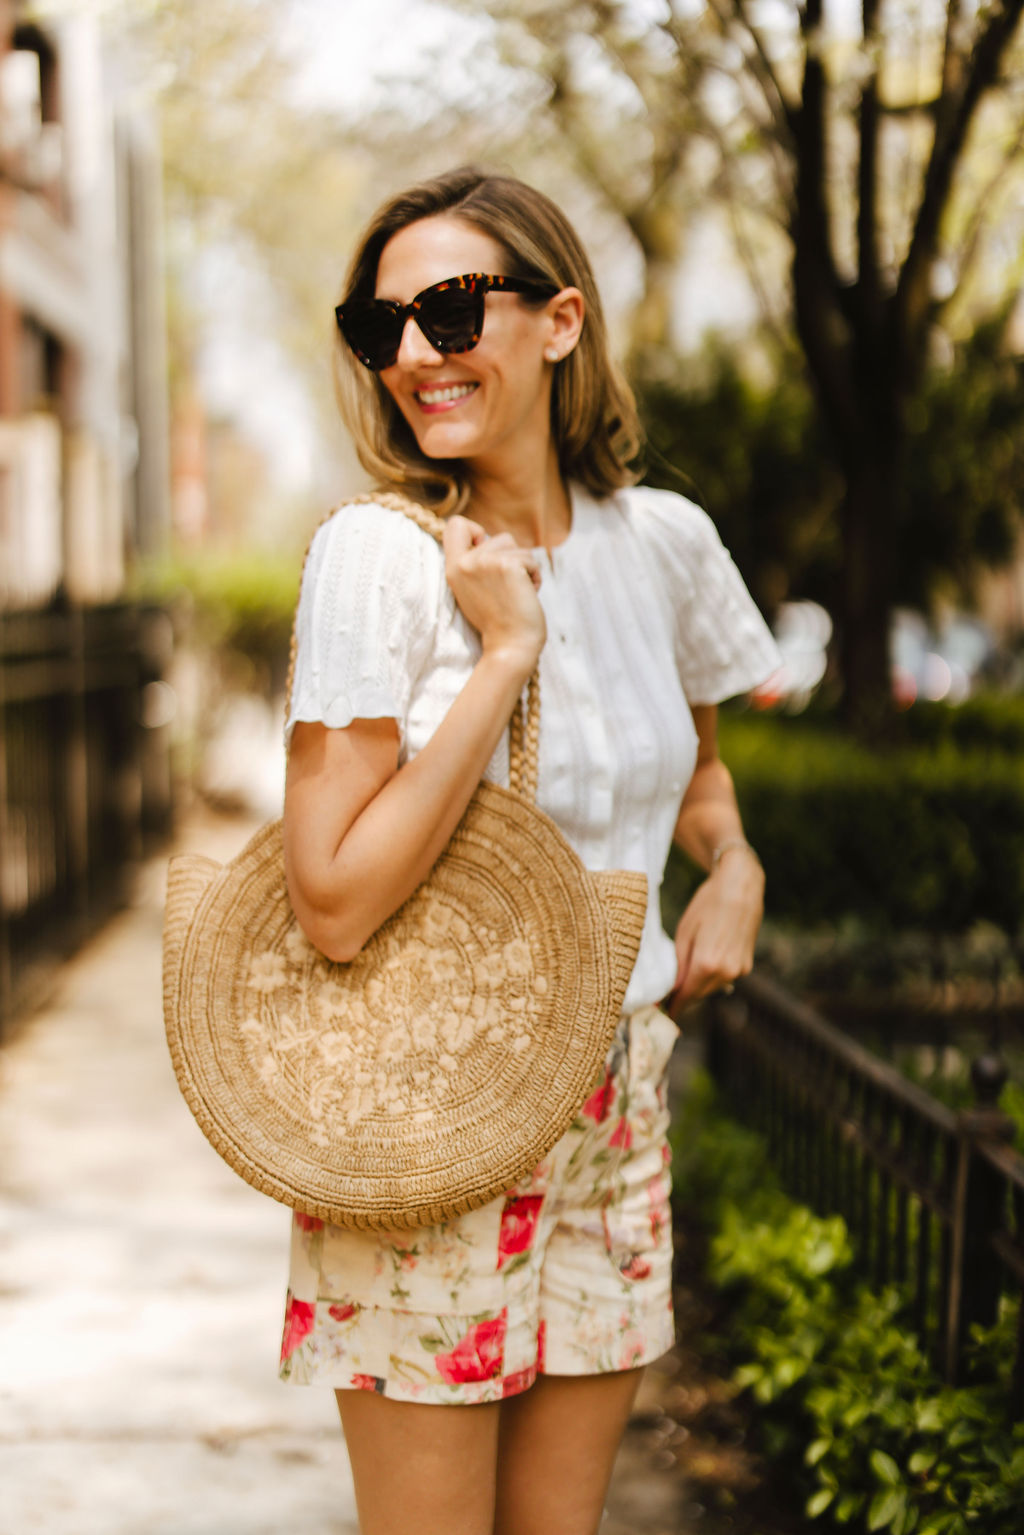 for Classic Style with Sézane woman wears white top, floral shorts, and weaved bag